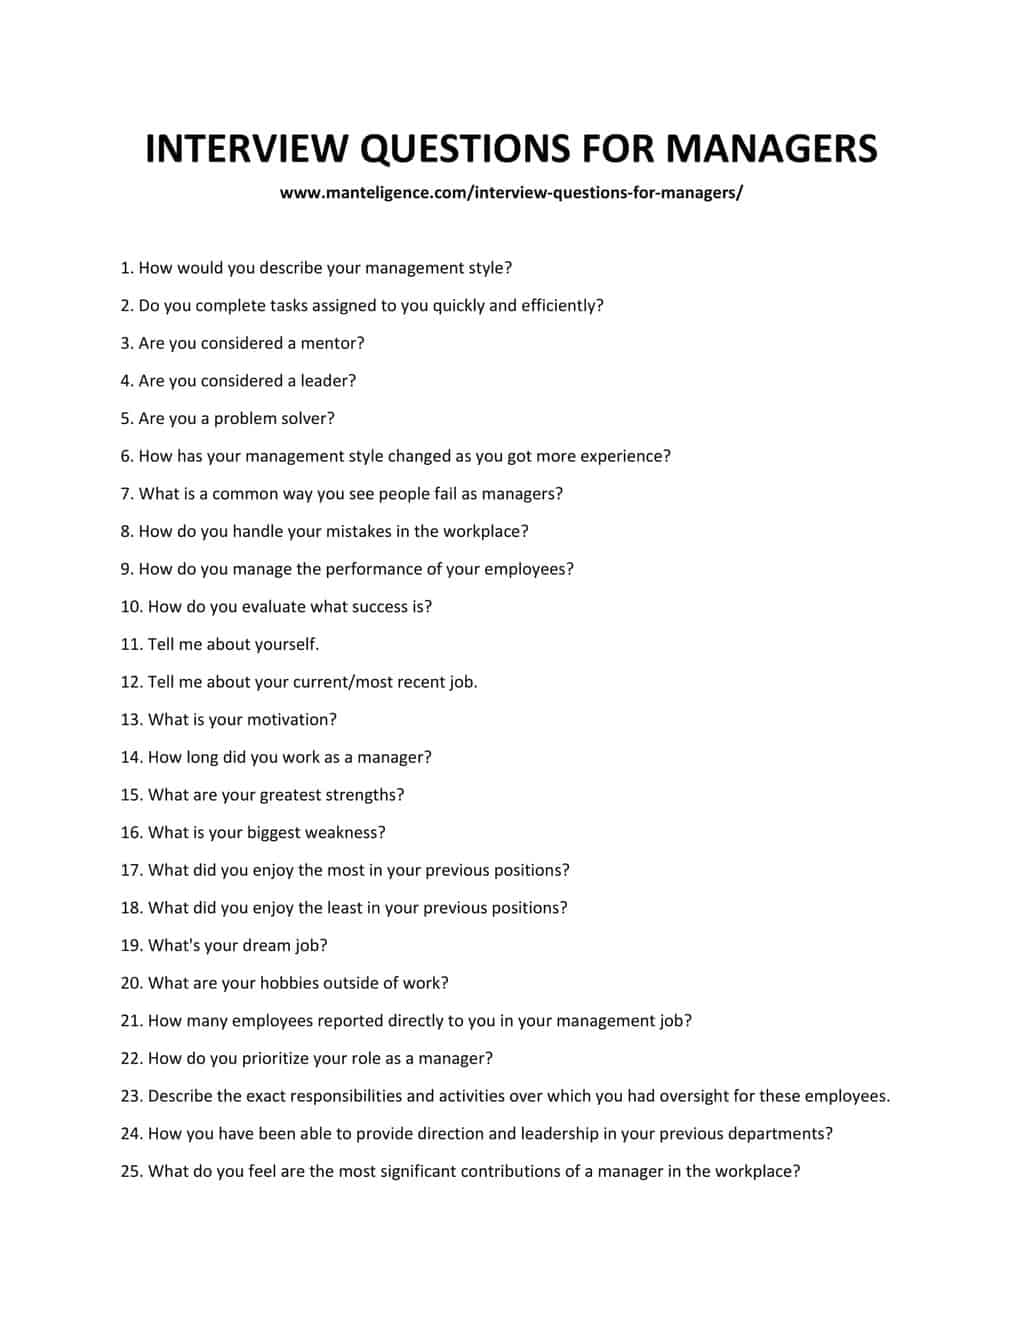 INTERVIEW_QUESTIONS_FOR_MANAGERS-1[1]